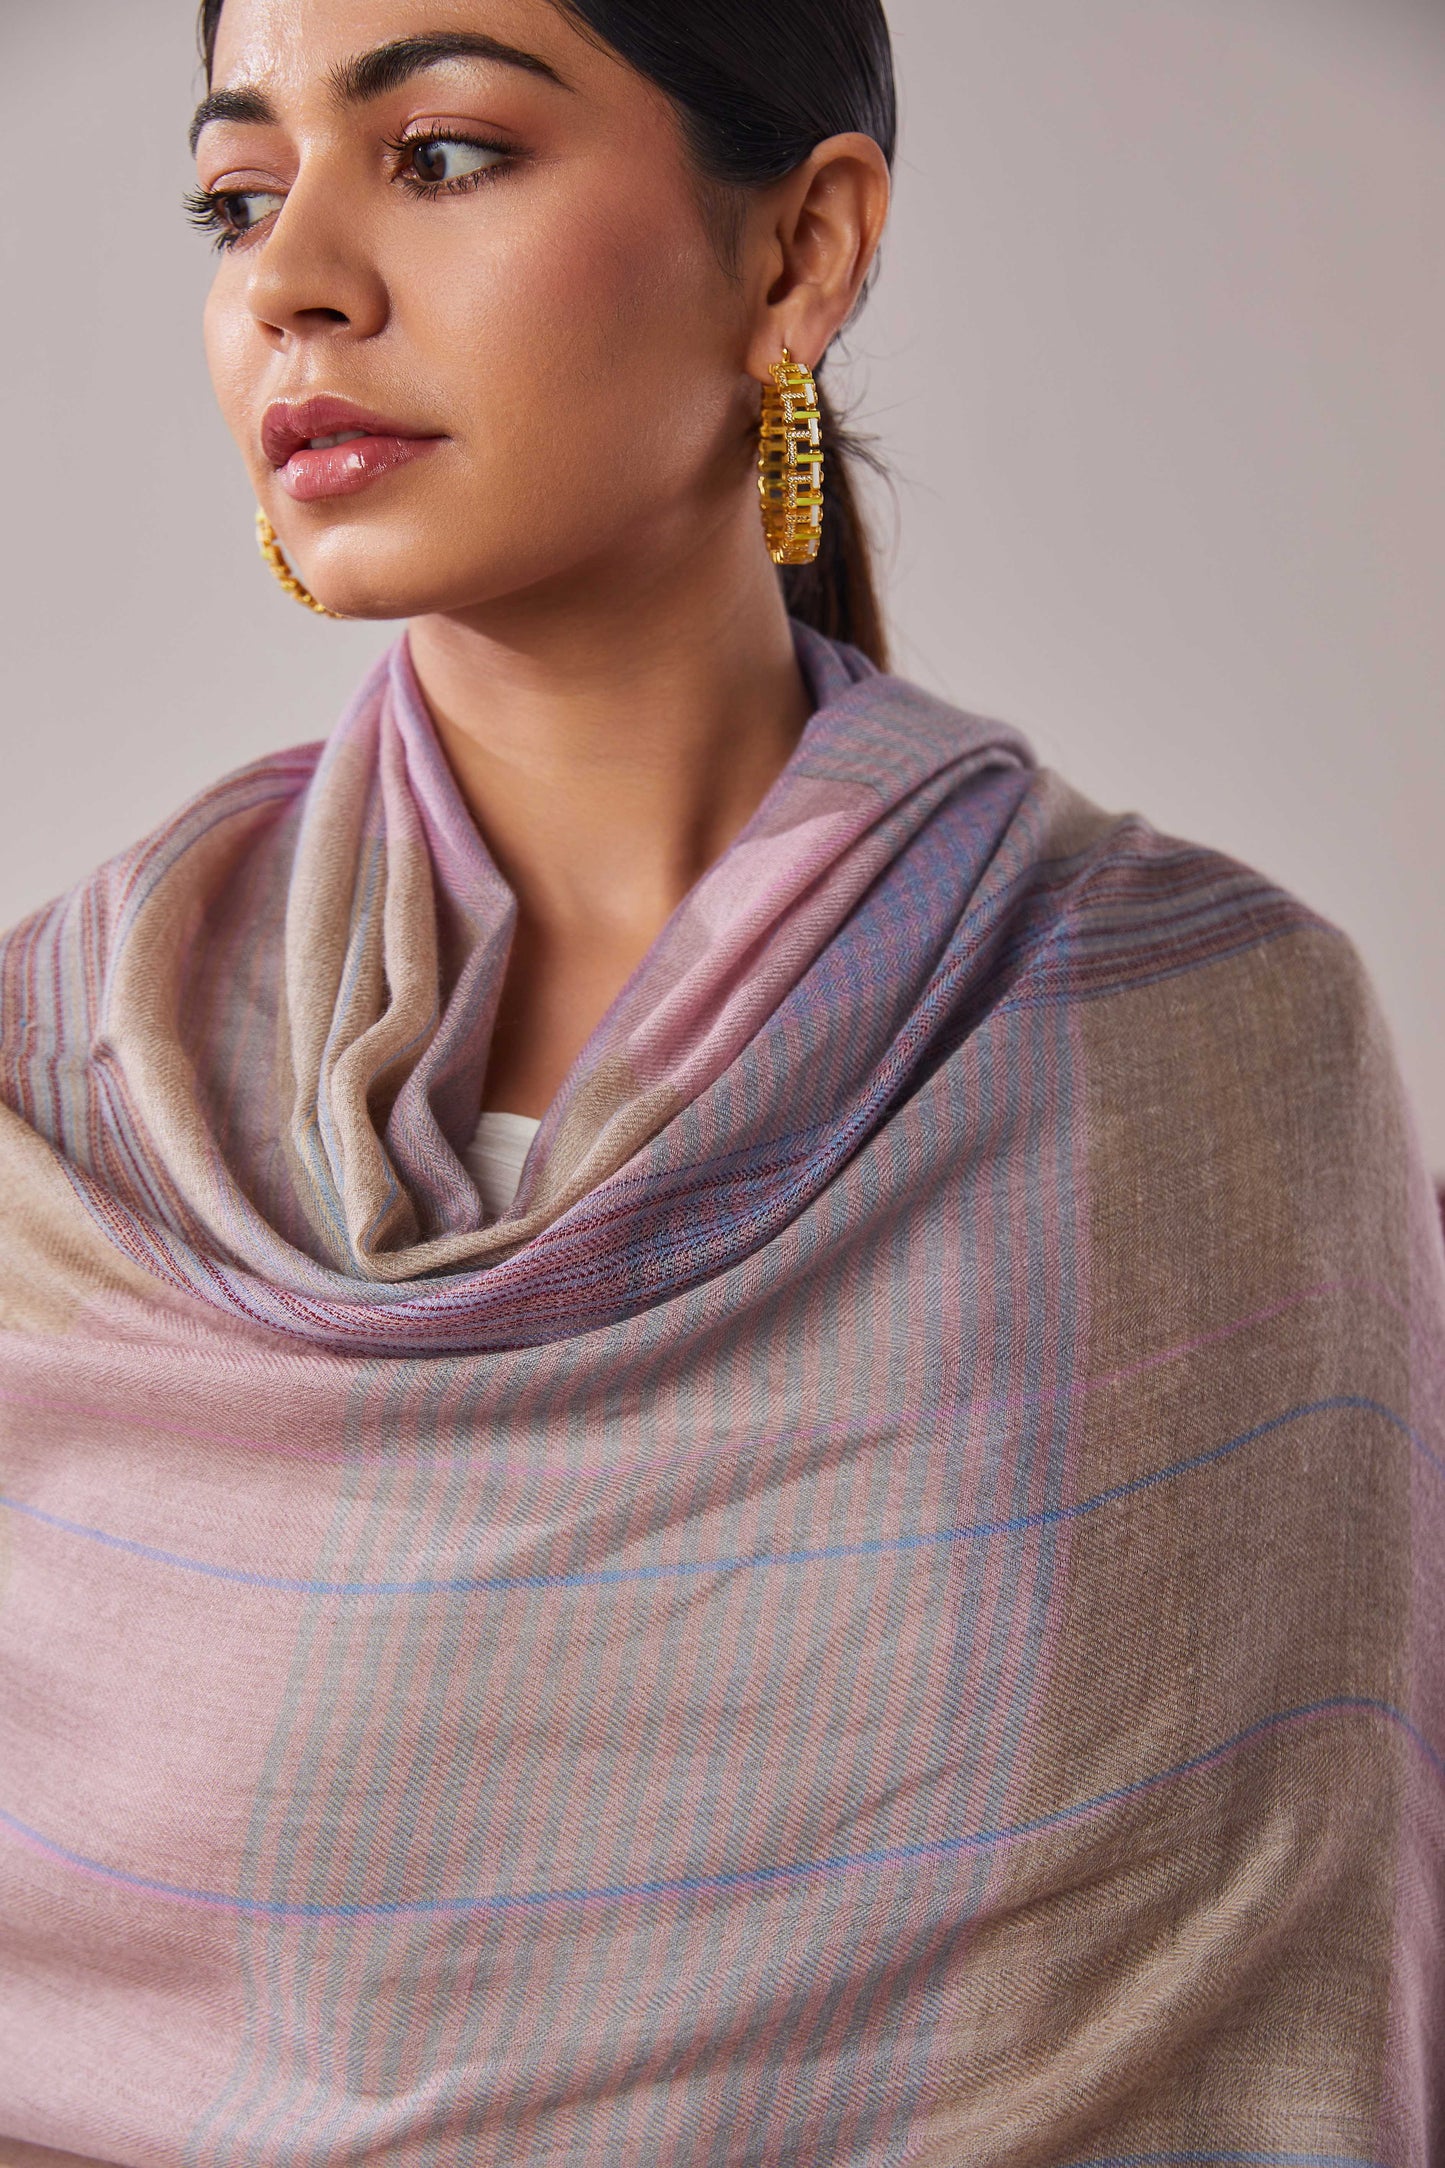 Model is wearing a pashmina striped stole from Shaza.